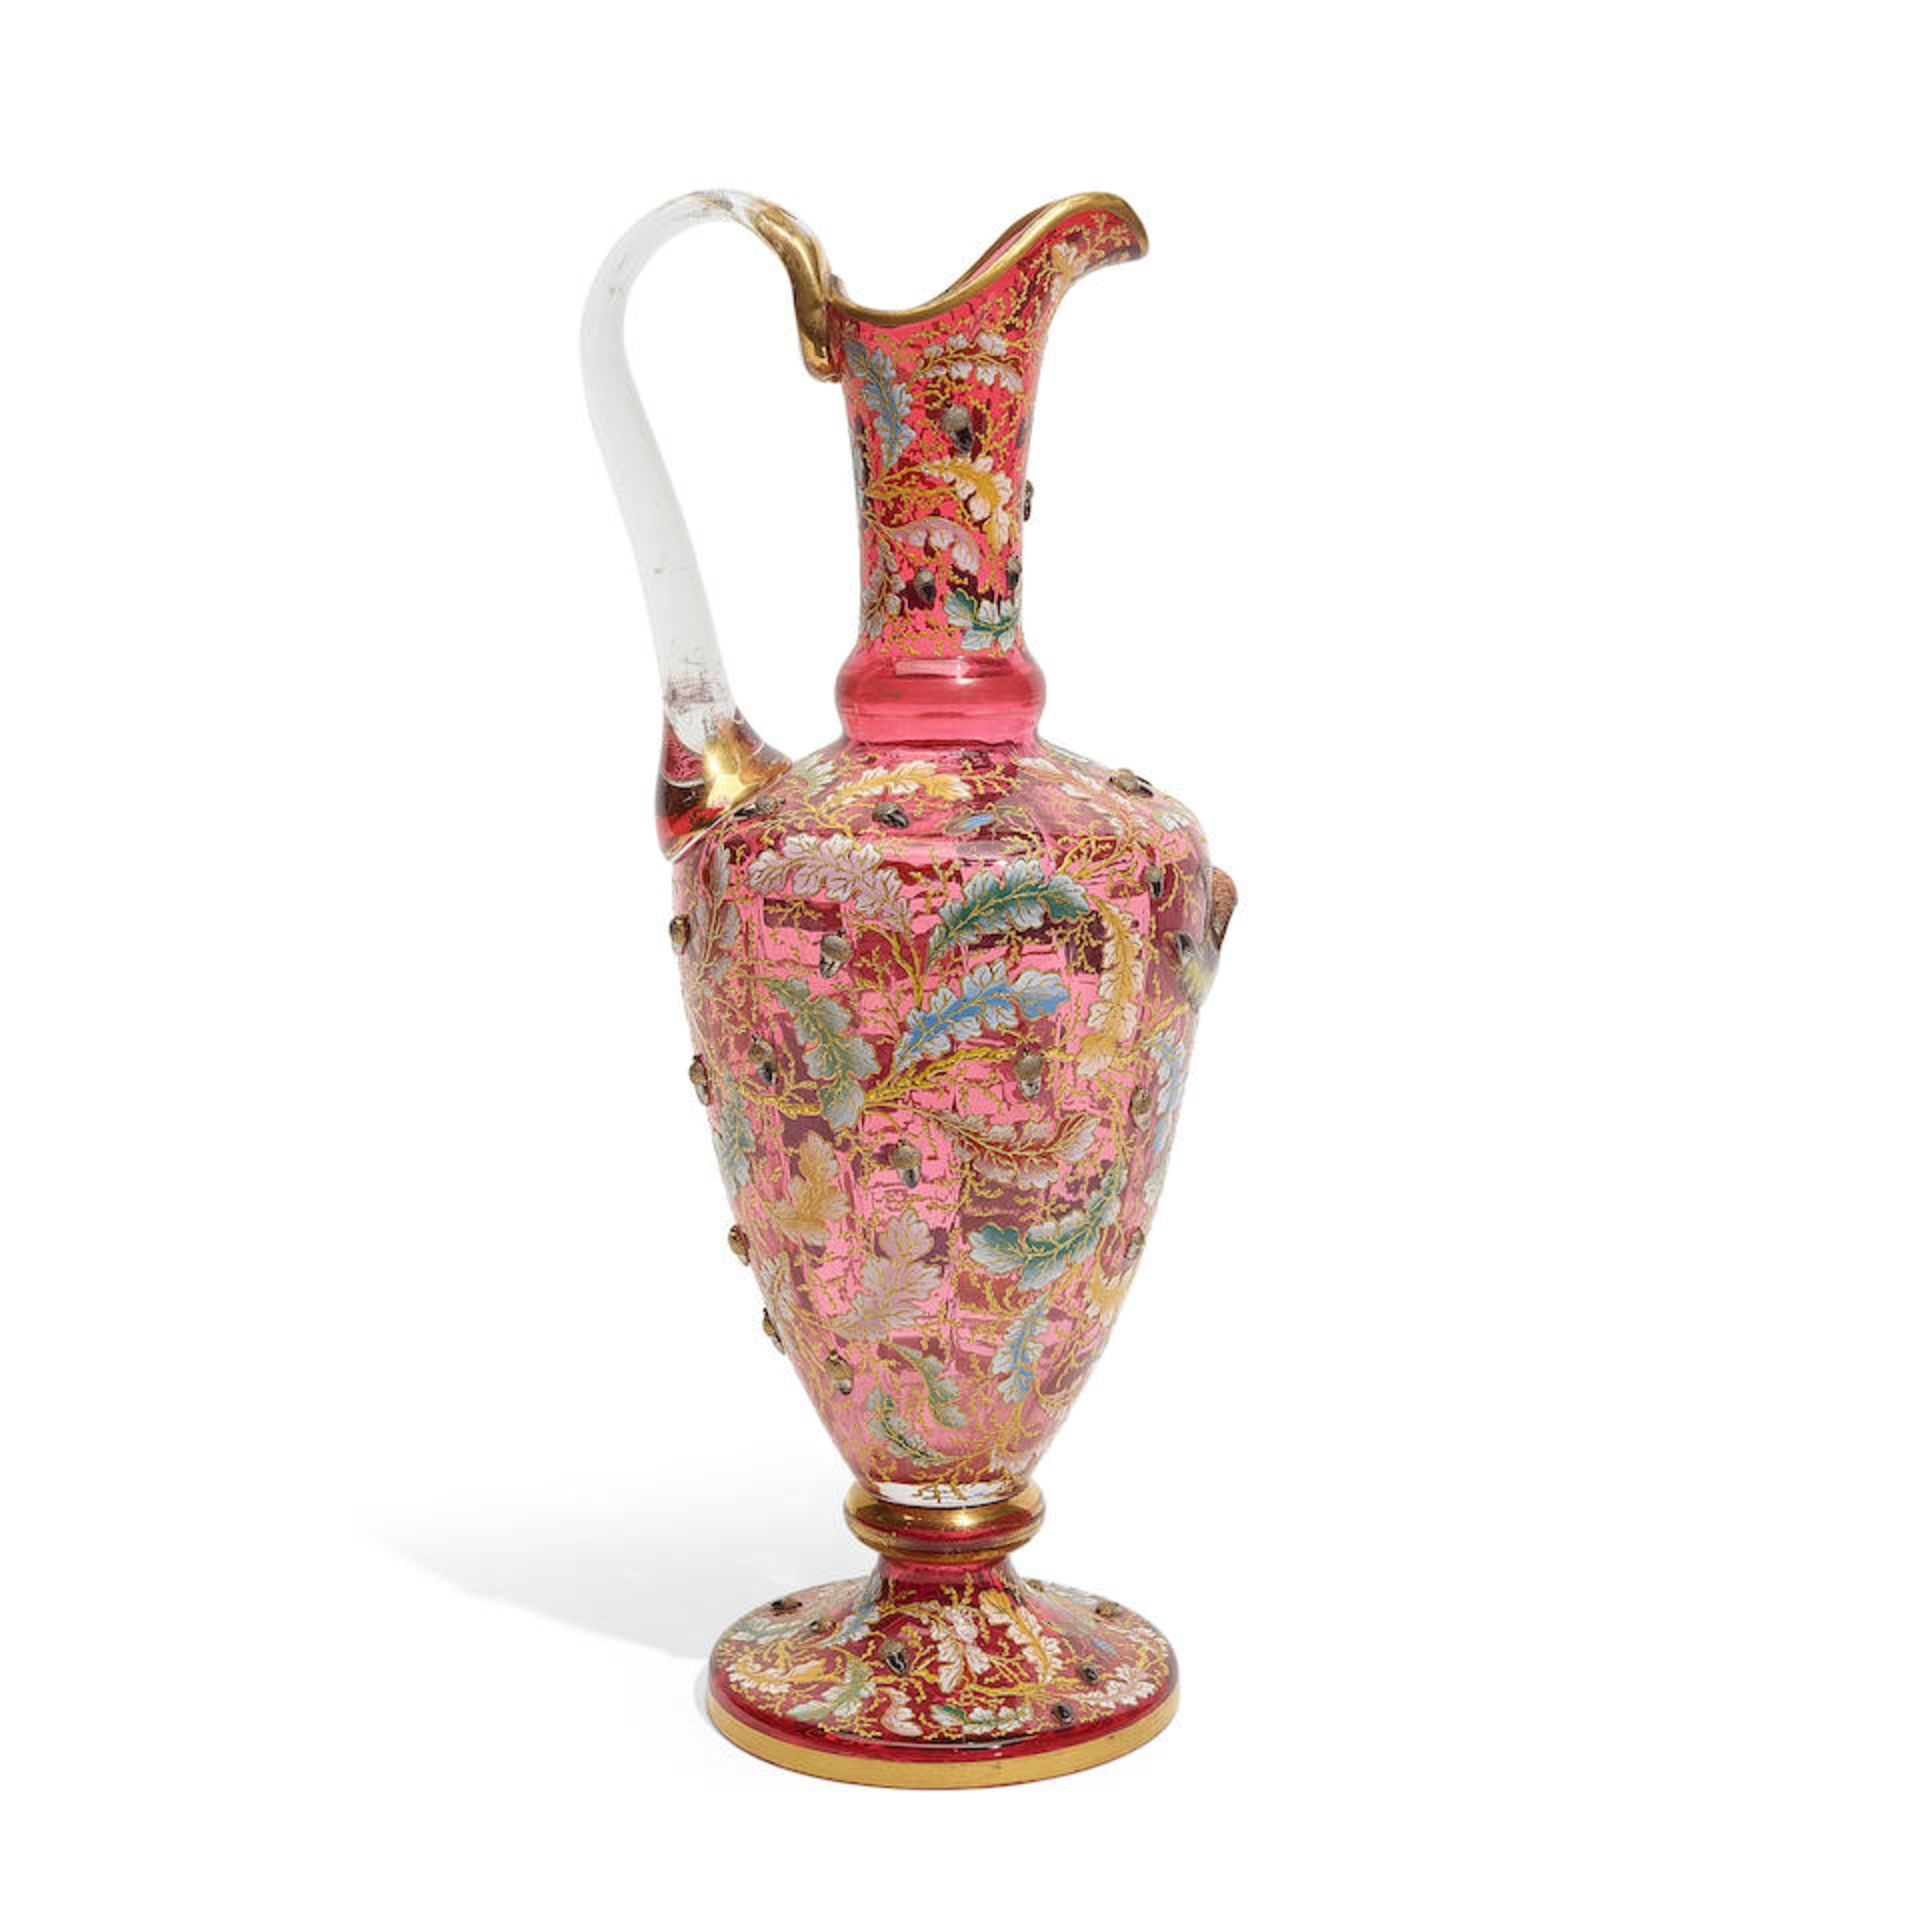 A MOSER GILT AND ENAMELLED CRANBERRY GLASS EWERLate 19th century